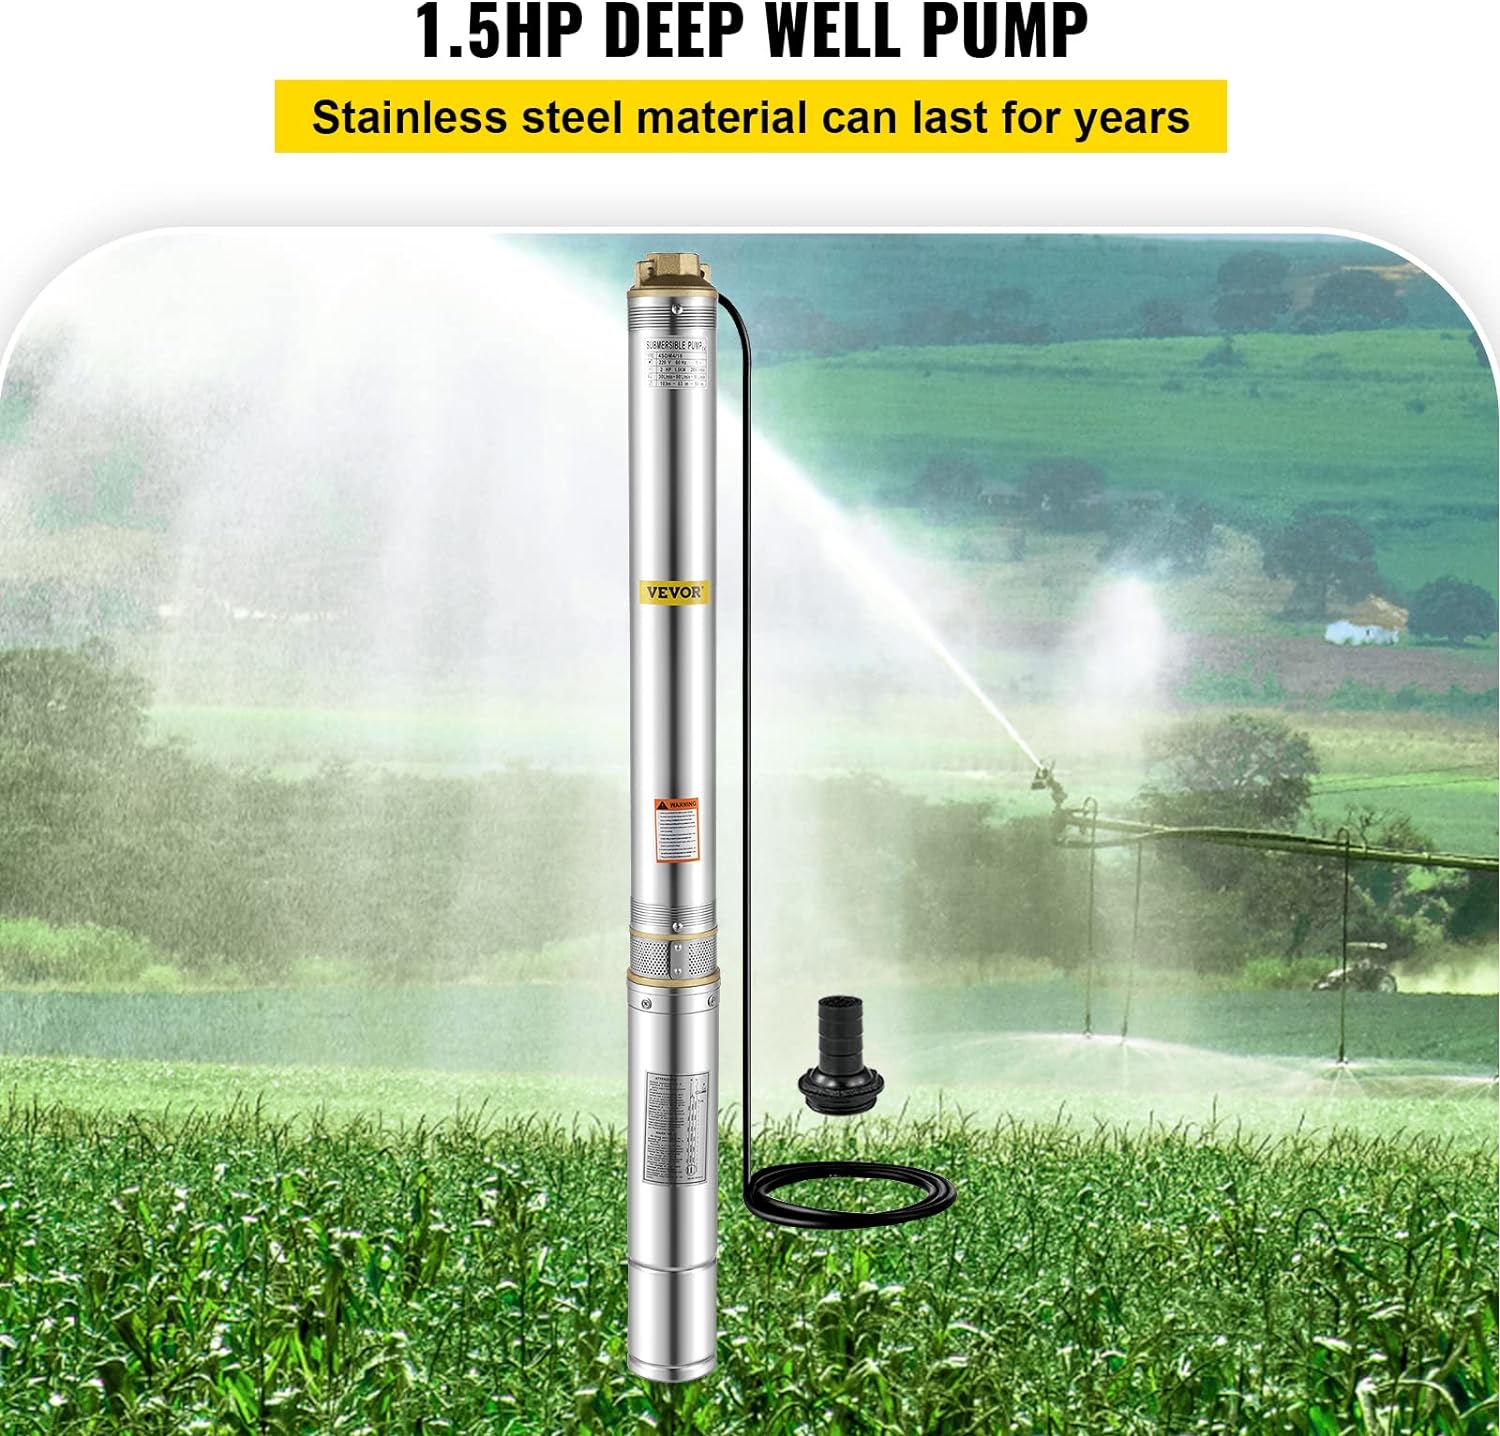 VEVOR Deep Well Submersible Pump, 1.5 hp 220V 50 Hz, Stainless Steel w/5 FT Cable Wire, 1.25 Water Outlet, 24 GPM  390 Ft Head for Farmland Irrigation and Factories